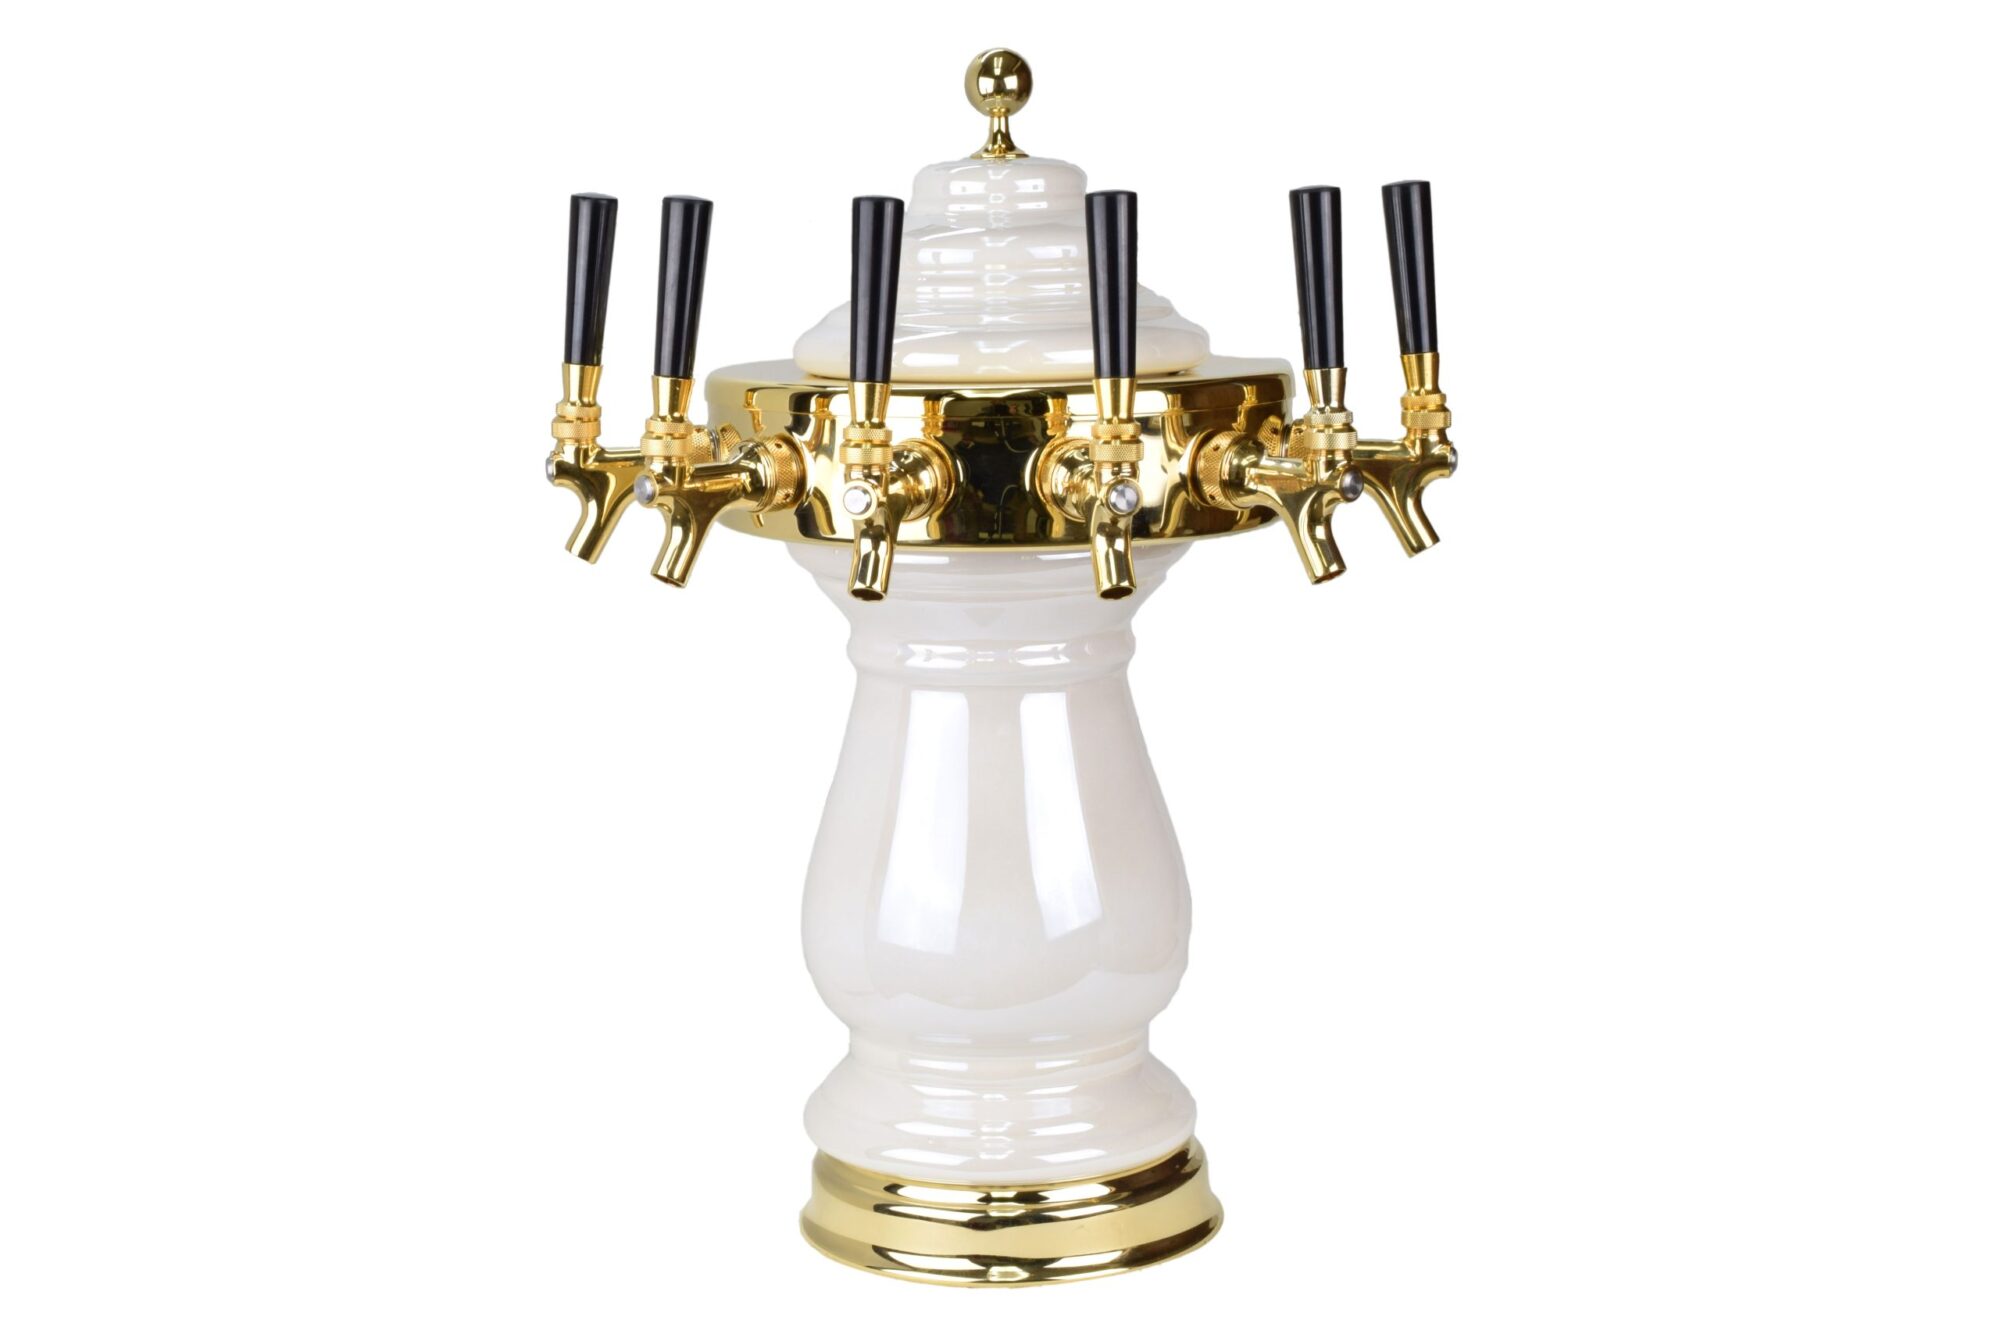 884B-6PW -- Six Faucet Ceramic Tower with PVD Gold Hardware and Faucets - Shown in Pearl White